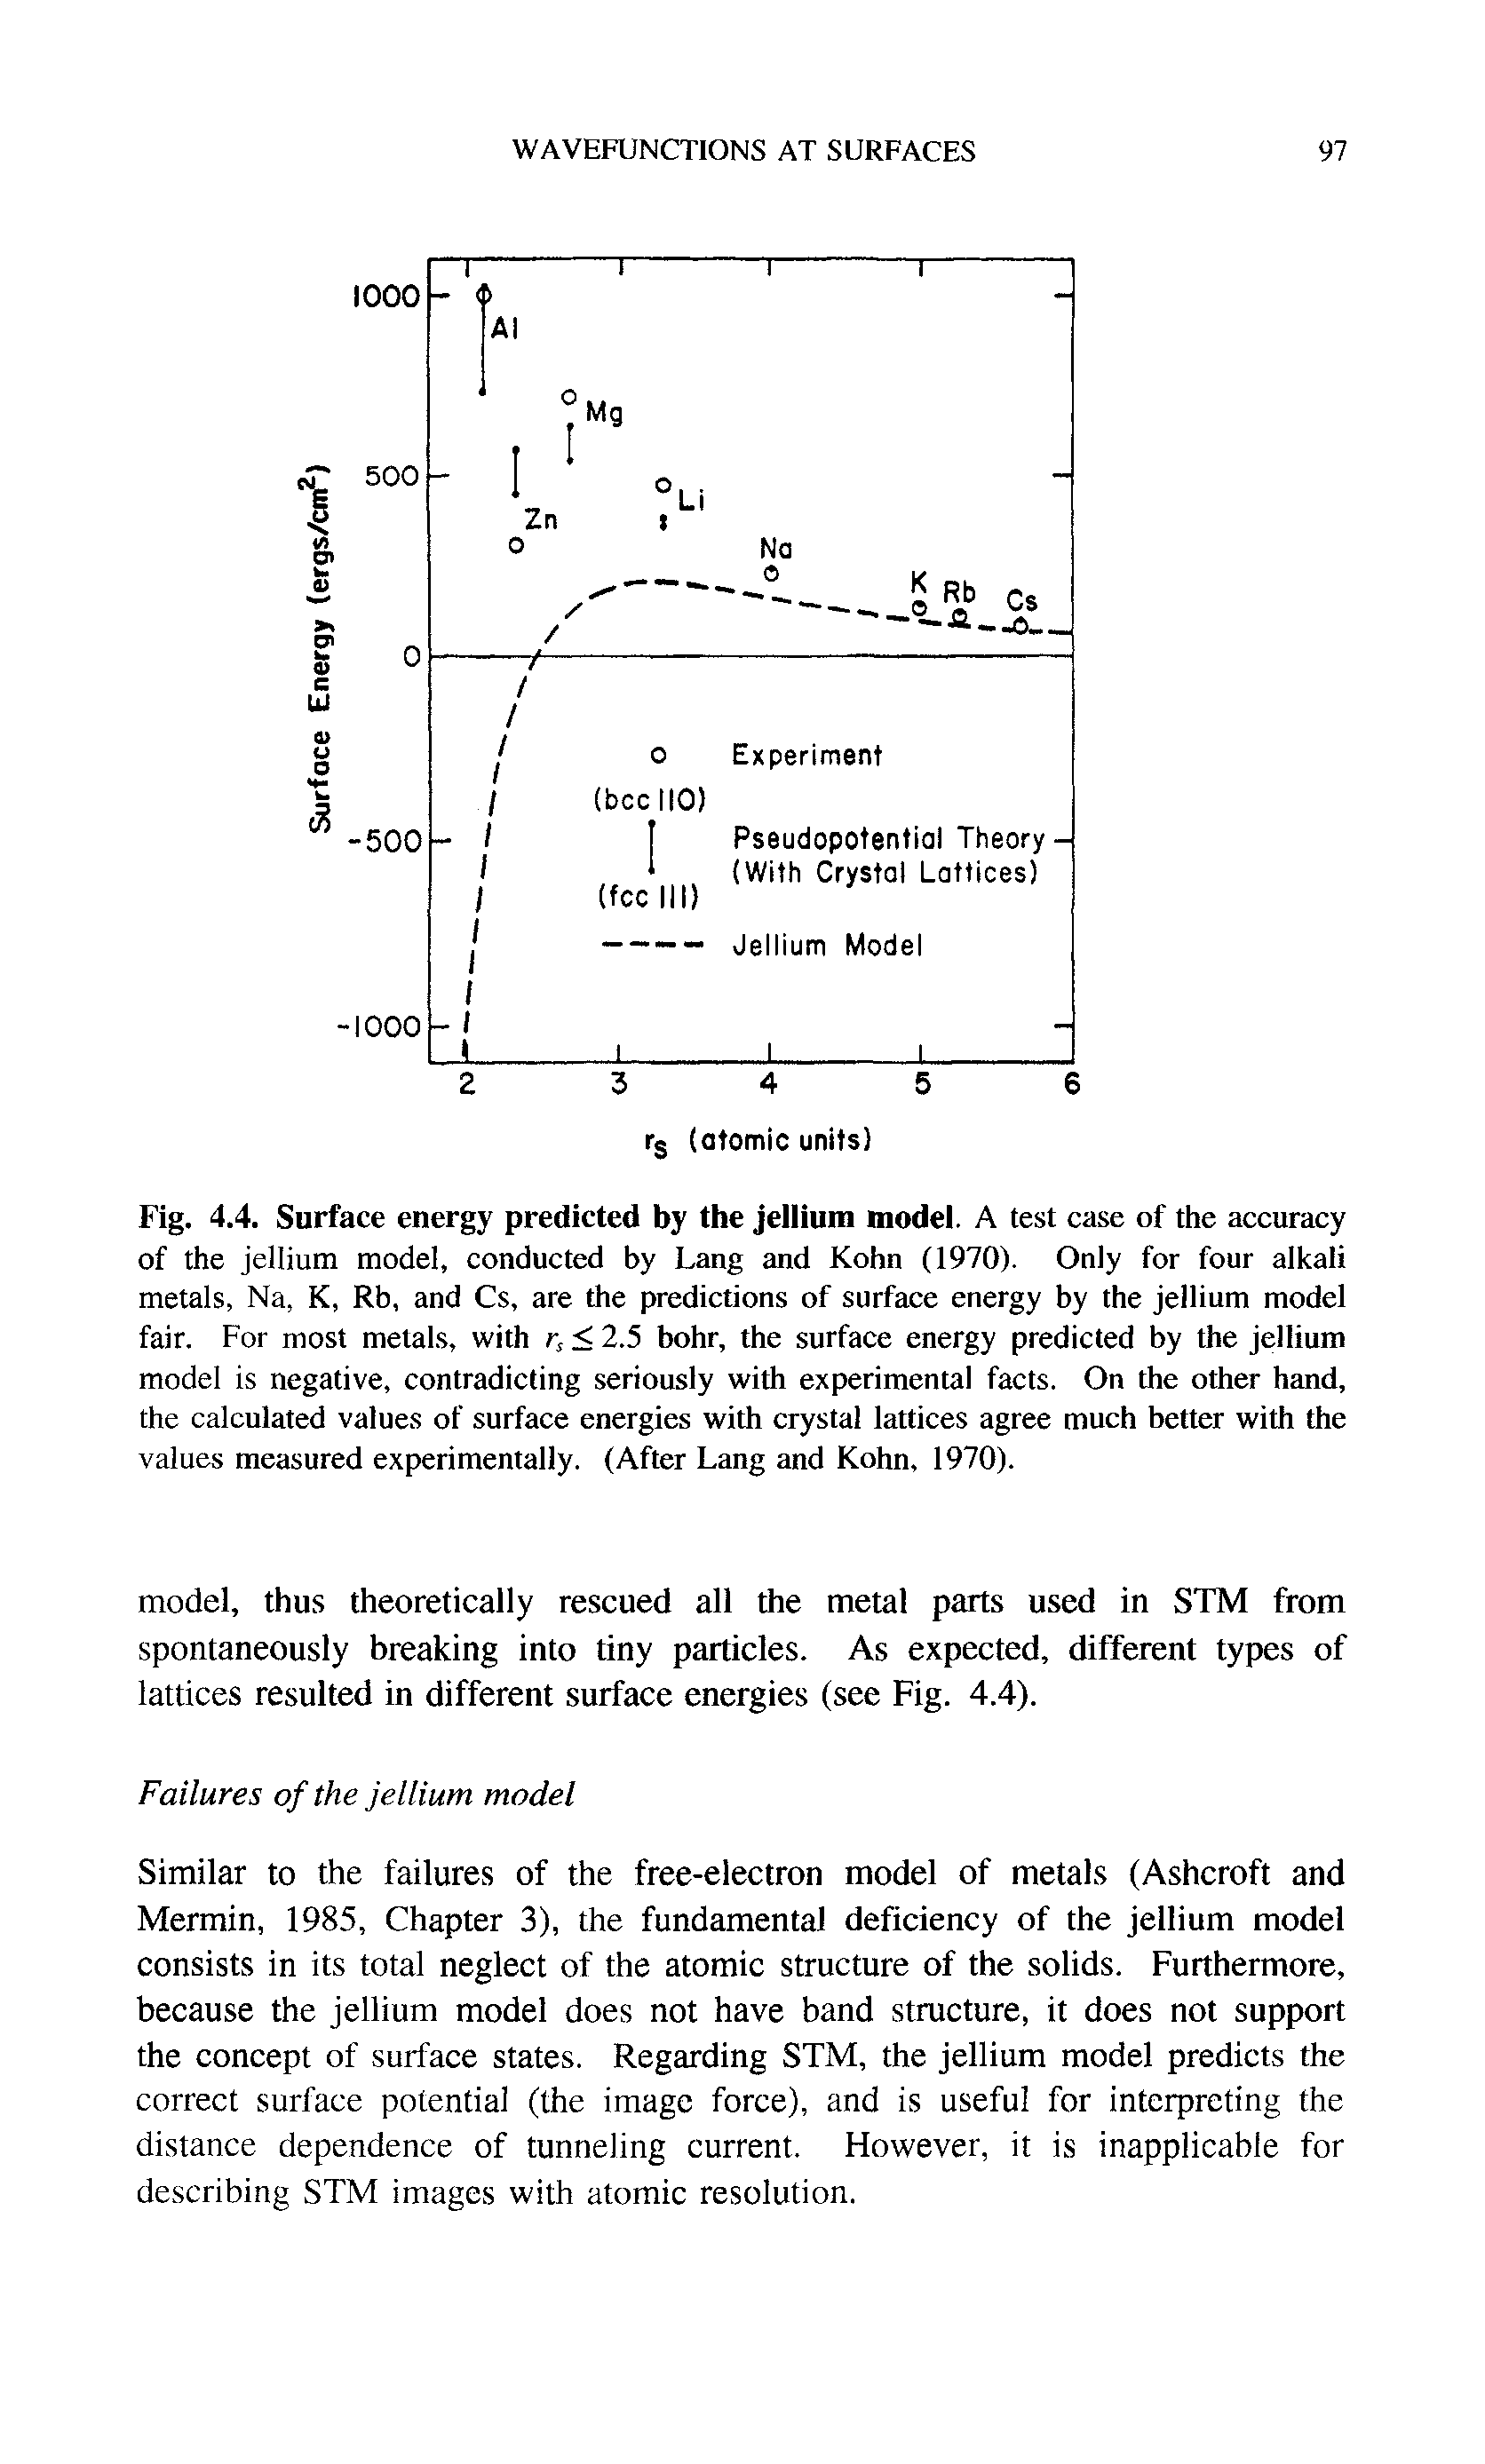 Fig. 4.4. Surface energy predicted by the jellium model. A test case of the accuracy of the jellium model, conducted by Lang and Kohn (1970). Only for four alkali metals, Na, K, Rb, and Cs, are the predictions of surface energy by the jellium model fair. For most metals, with r, < 2.5 bohr, the surface energy predicted by the jellium model is negative, contradicting seriously with experimental facts. On the other hand, the calculated values of surface energies with crystal lattices agree much better with the values measured experimentally. (After Lang and Kohn, 1970).